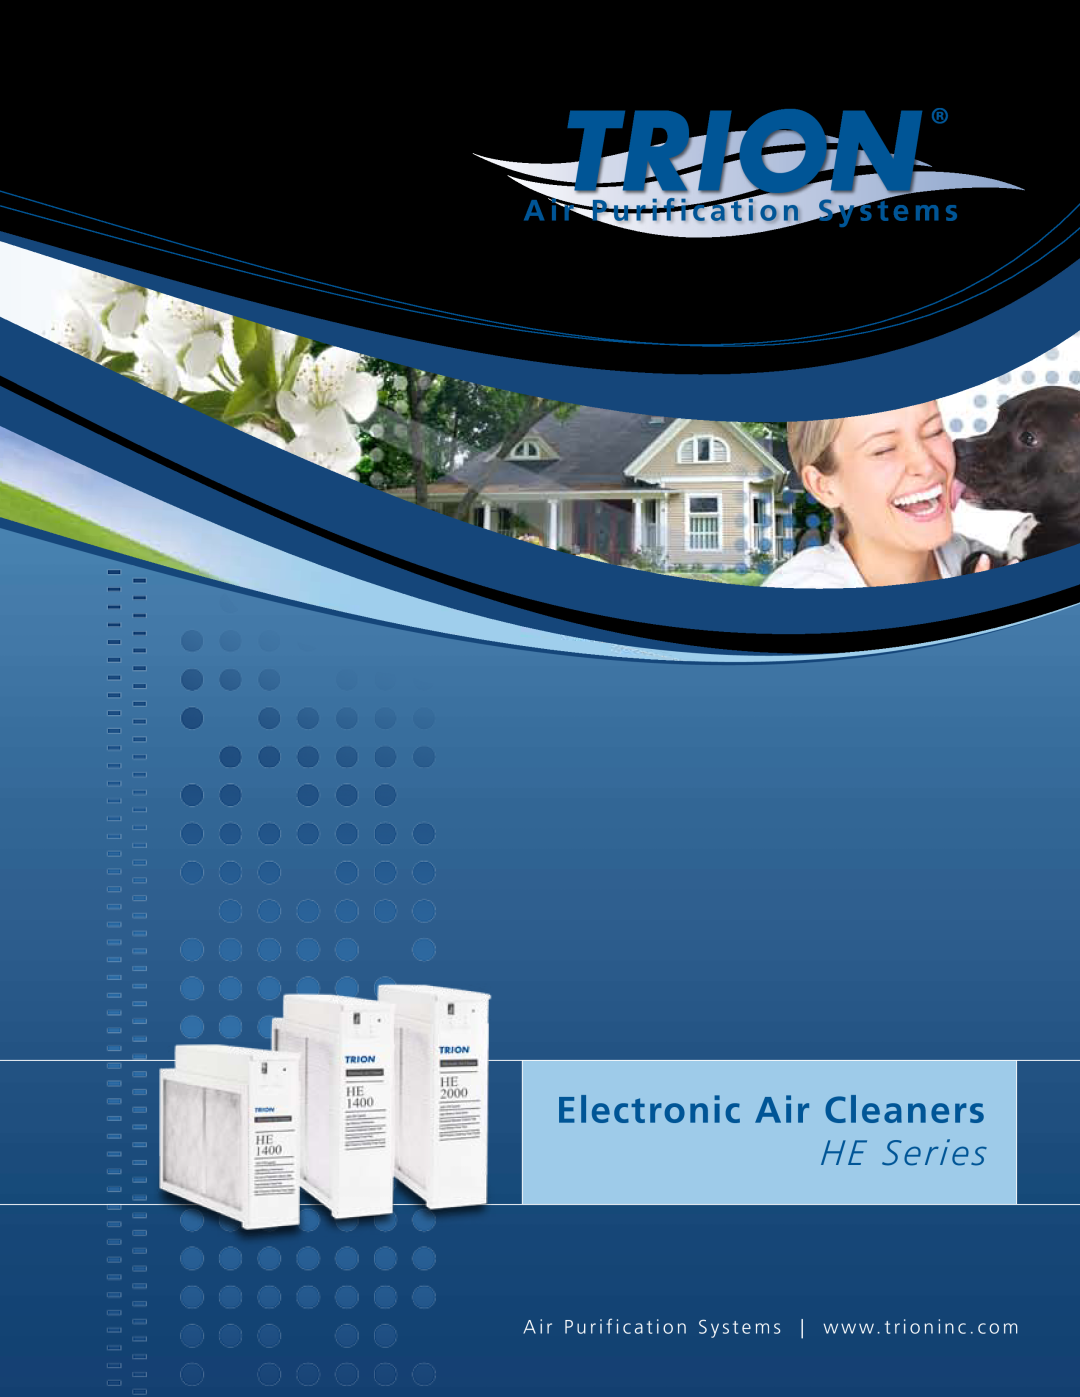 Trion HE Series manual Electronic Air Cleaners, A i r P u r i f i c a t i o n S y s t e m s 